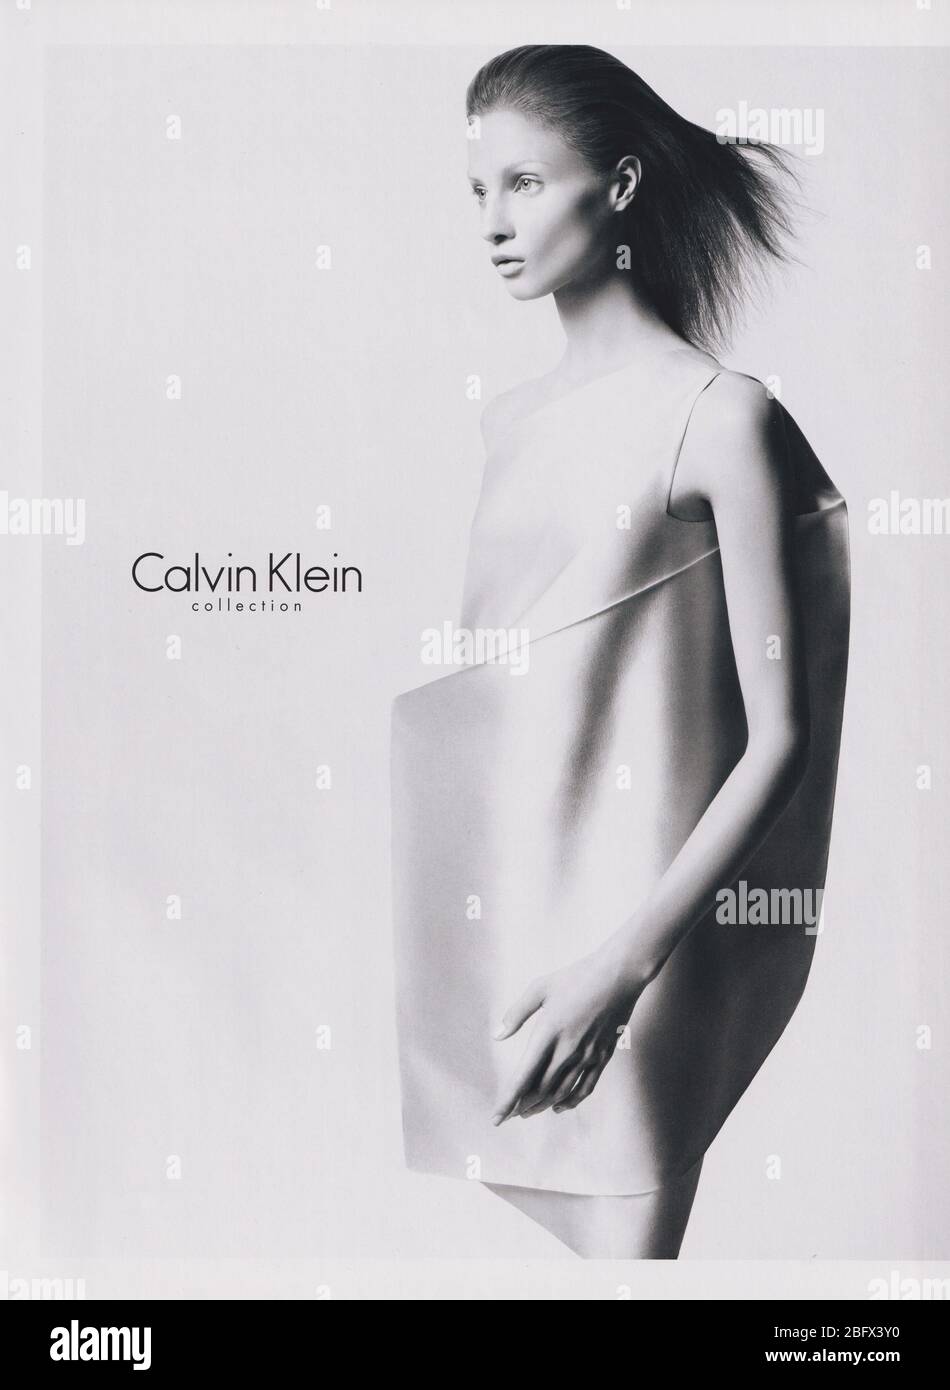 Calvin Klein Poster High Resolution Stock Photography and Images - Alamy